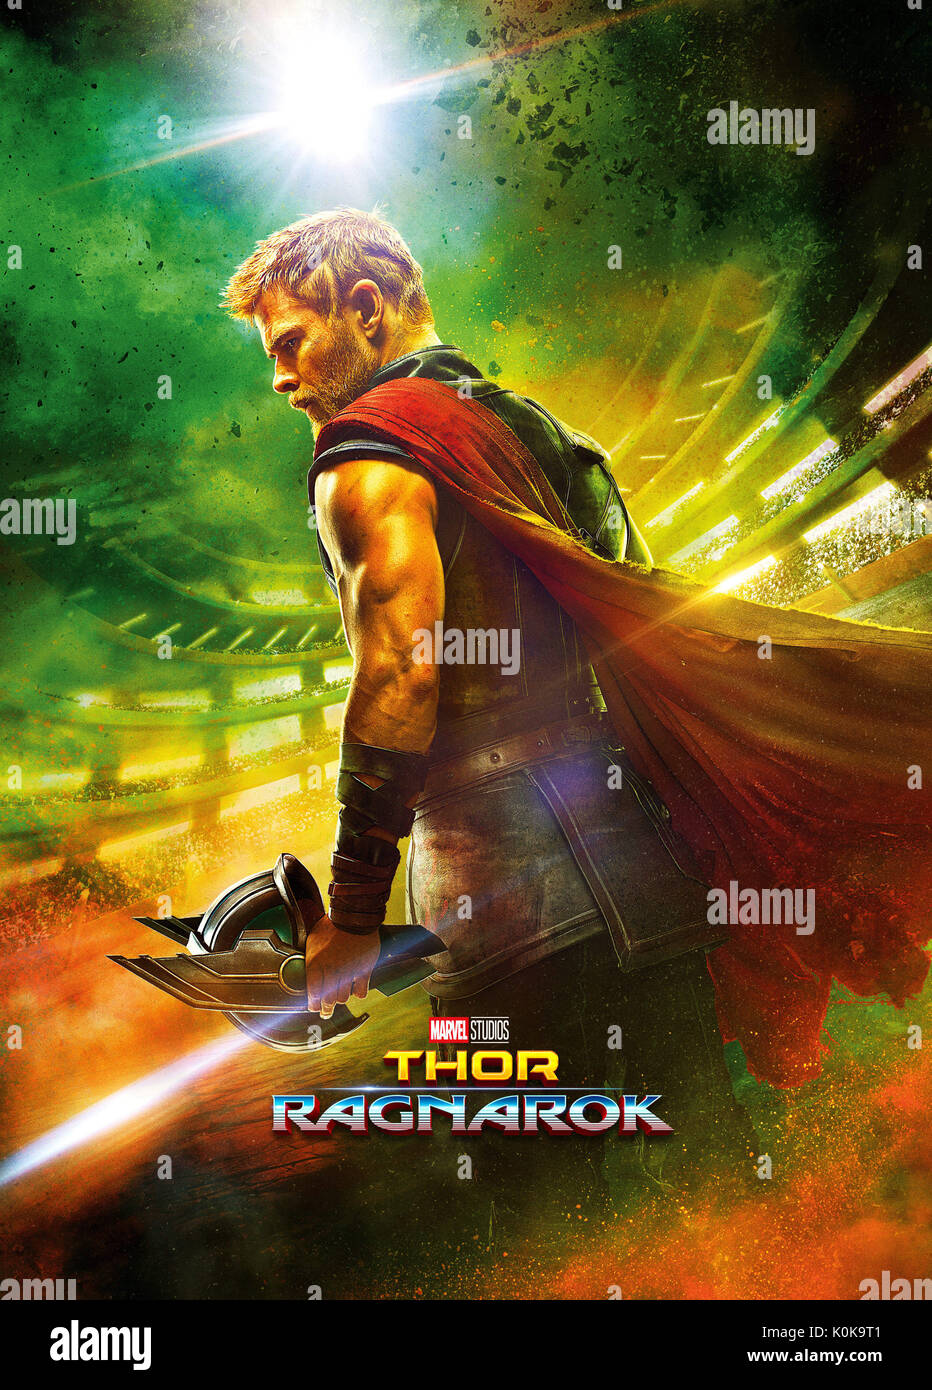 RELEASE DATE: November 3, 2017 TITLE: Thor: Ragnarok STUDIO: Marvel DIRECTOR: Taika Waititi PLOT: Thor must face the Hulk in a gladiator match and save his people from the ruthless Hela STARRING: CHRIS HEMSWORTH as Thor Poster art. (Credit: Marvel/Entertainment Pictures Stock Photo